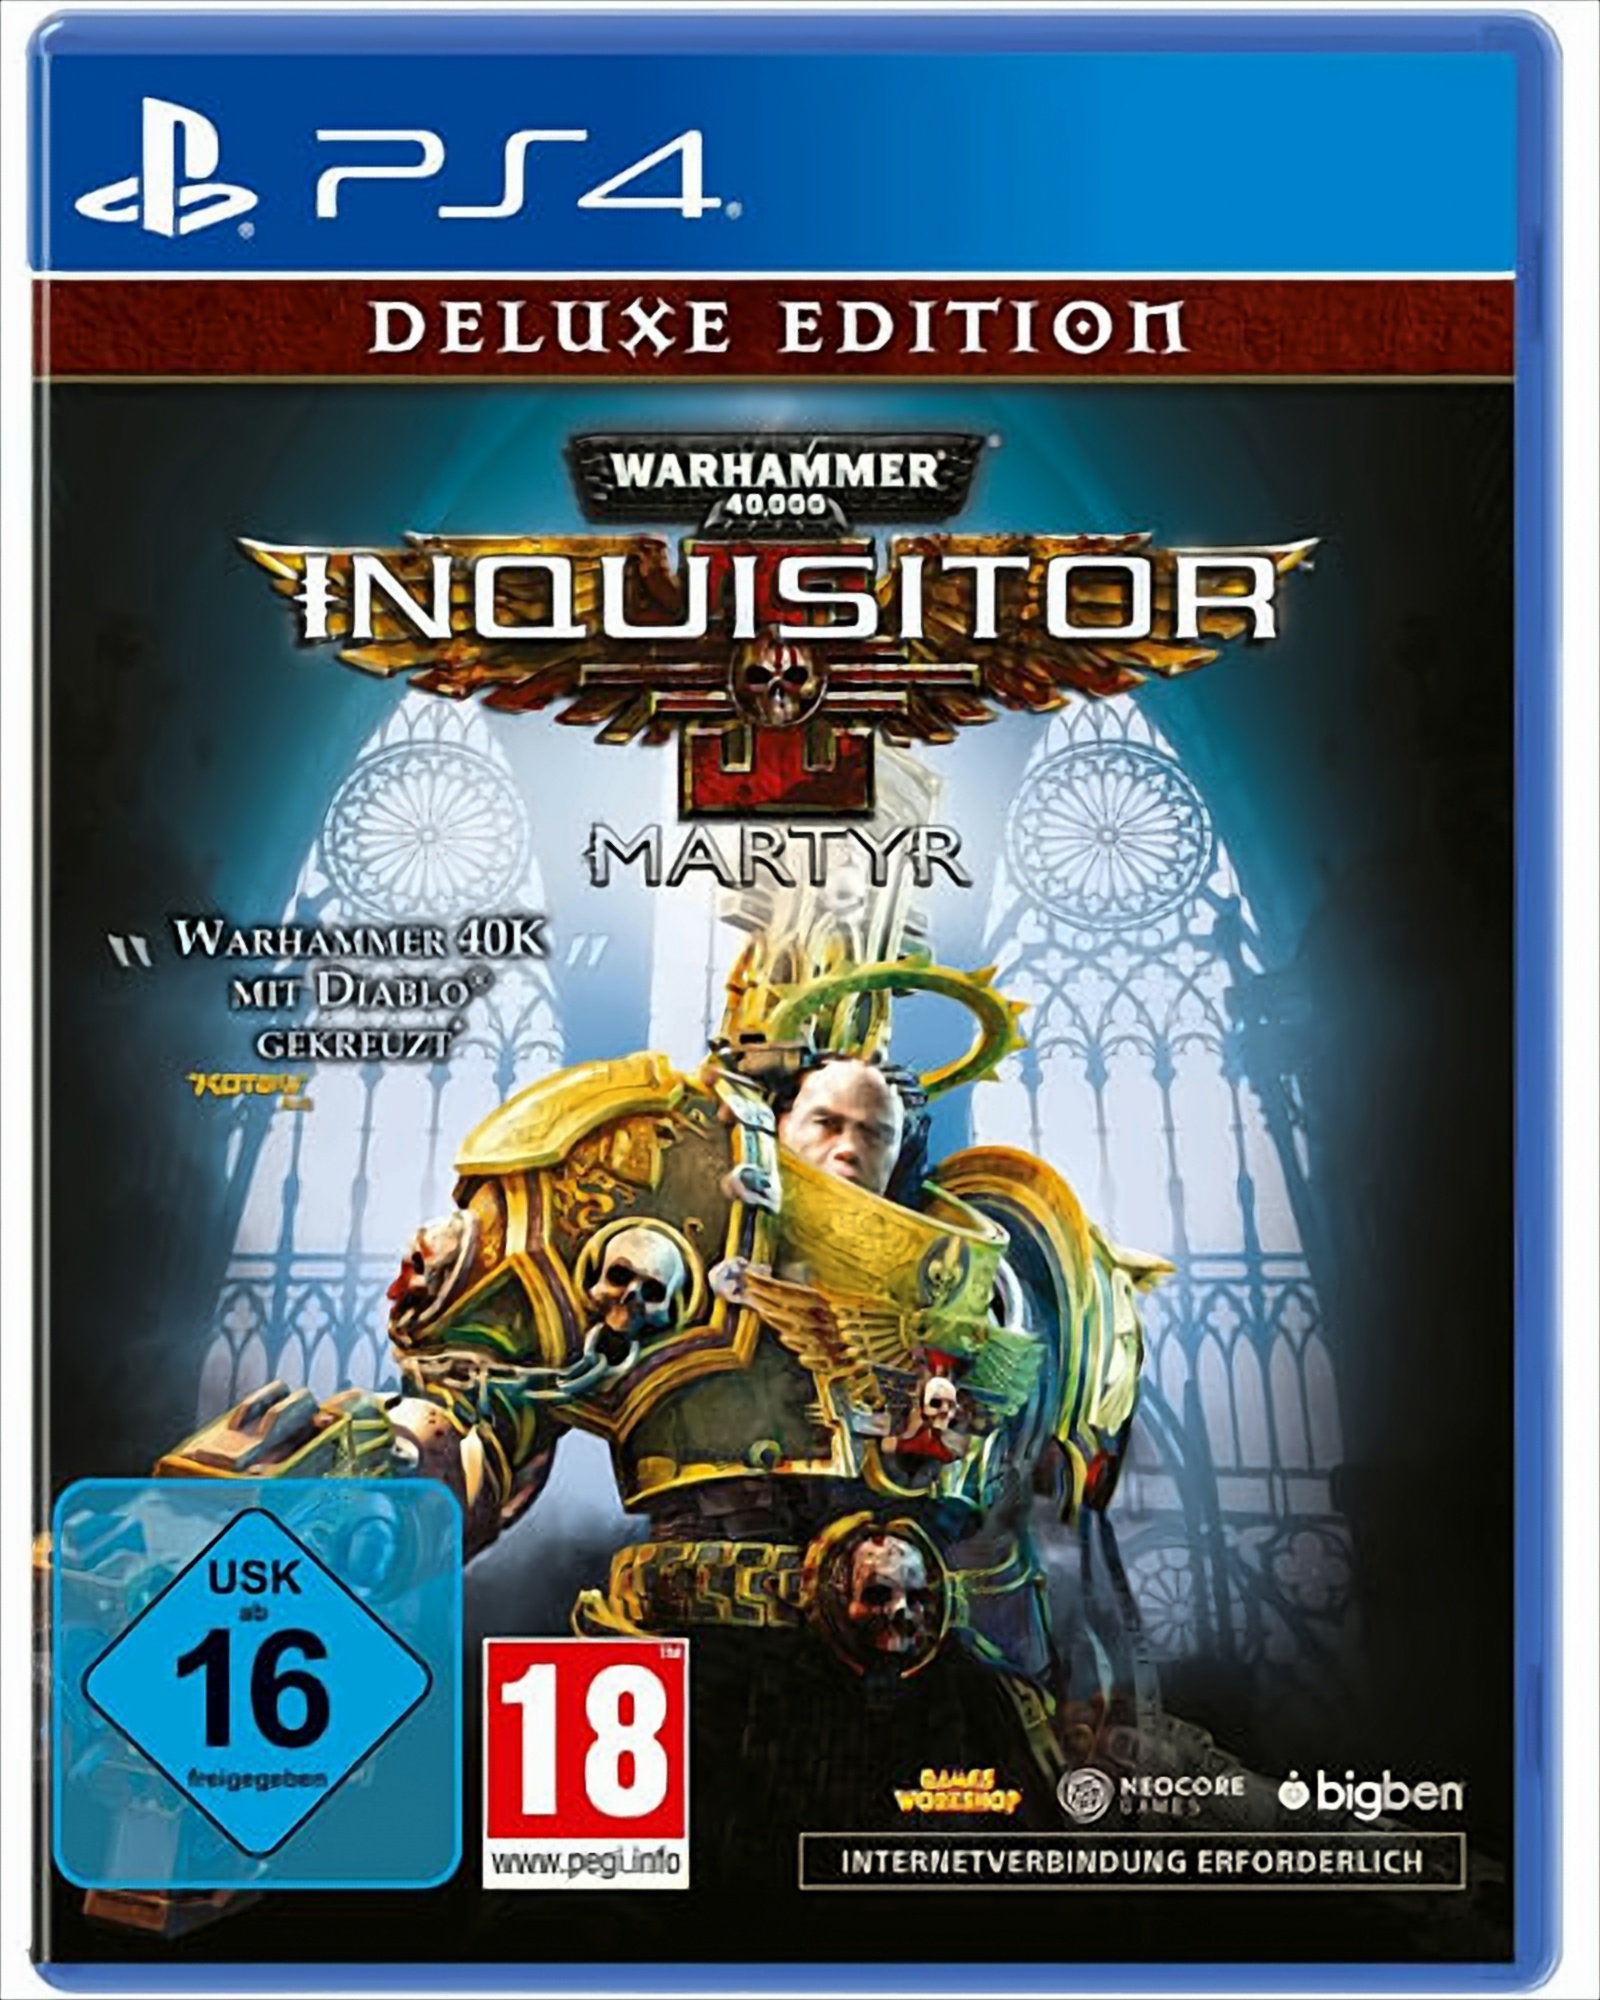 Edition DeLuxe [PlayStation 40.000 Martyr PS4 - Warhammer - Inquisitor 4]